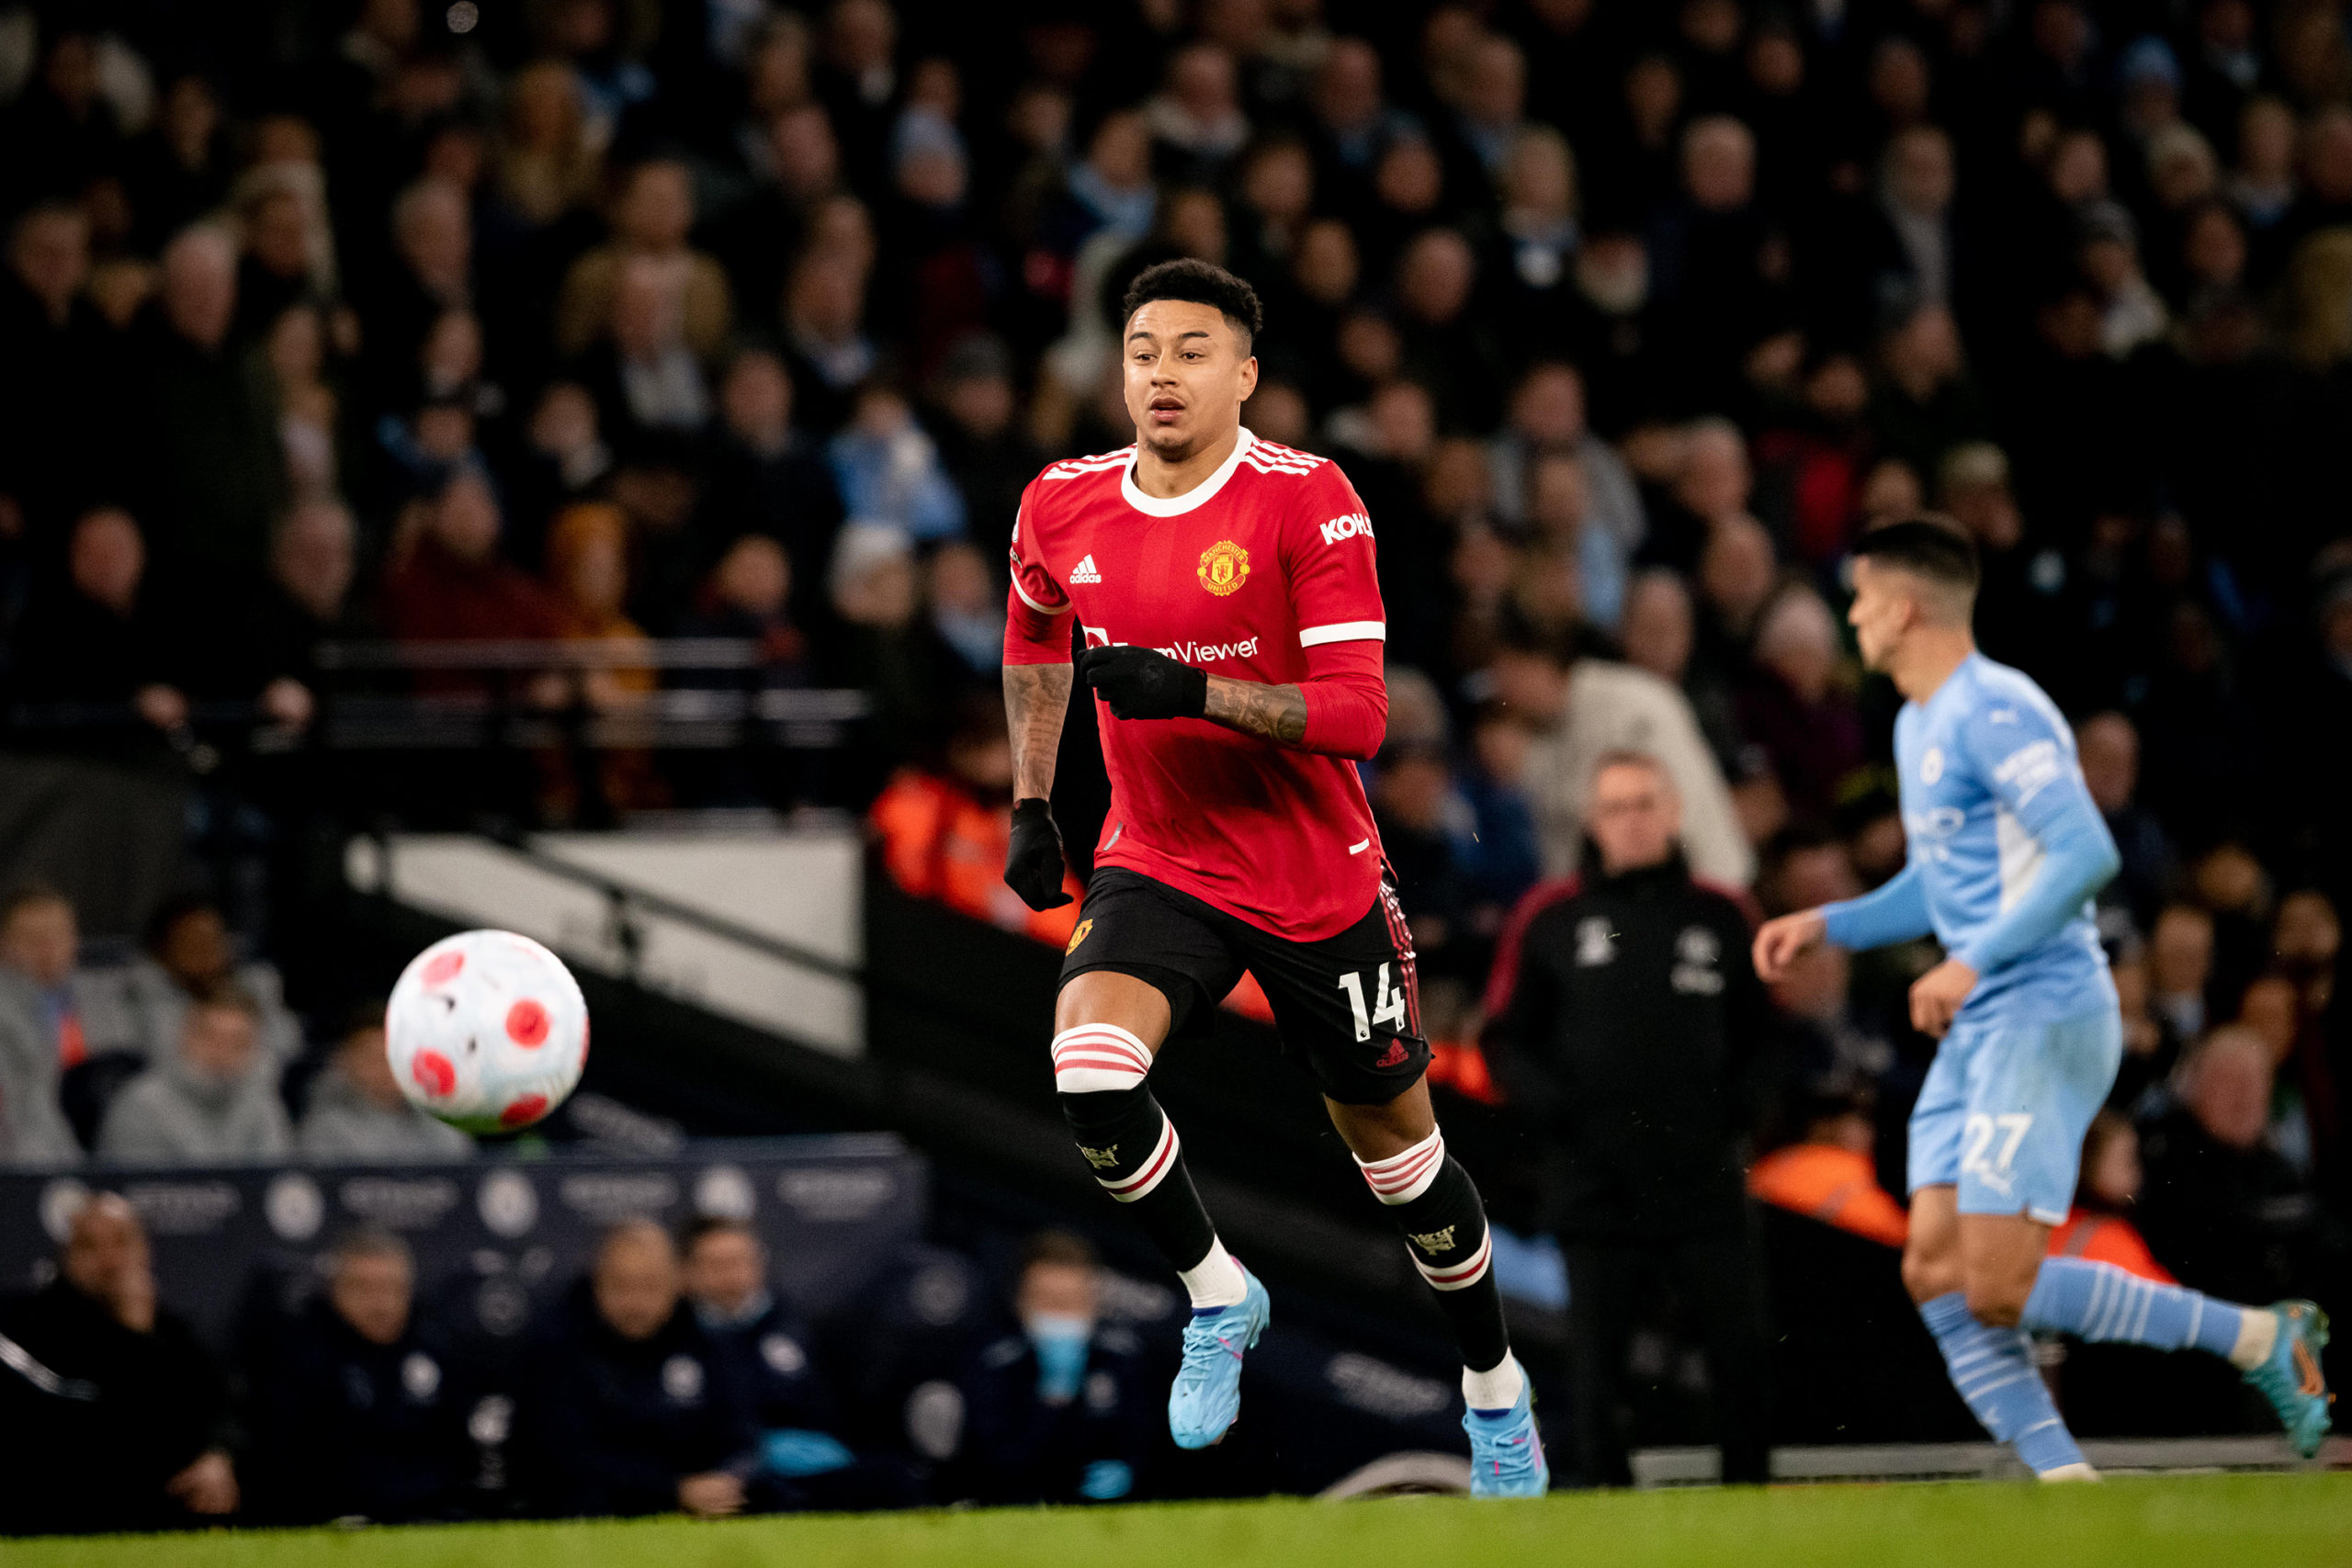 Report claims West Ham will have to pay £21 million to sign Jesse Lingard alternative